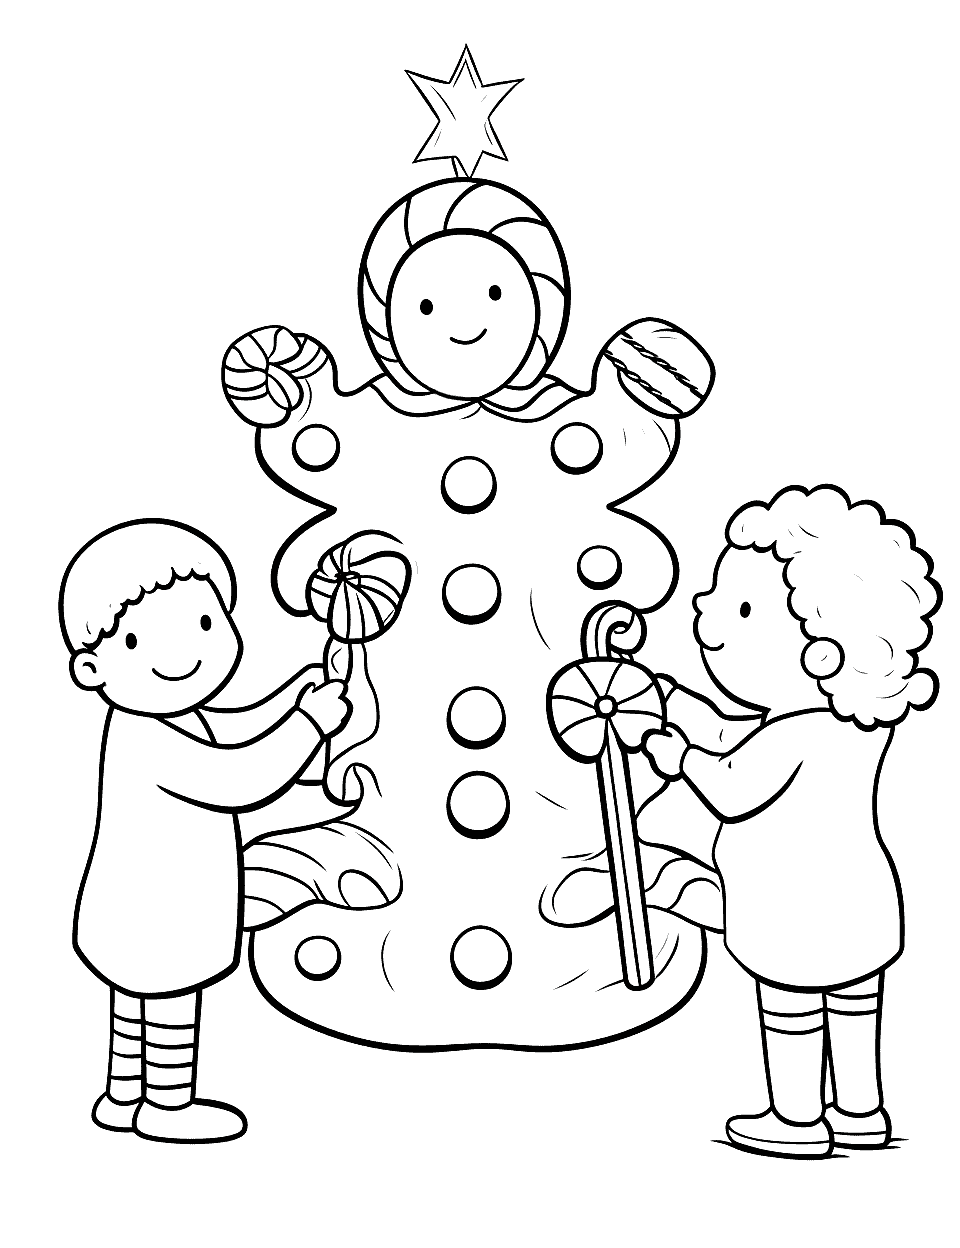 Decorating the Gingerbread Man Christmas Coloring Page - Kids decorating a giant gingerbread man with candies and frosting.